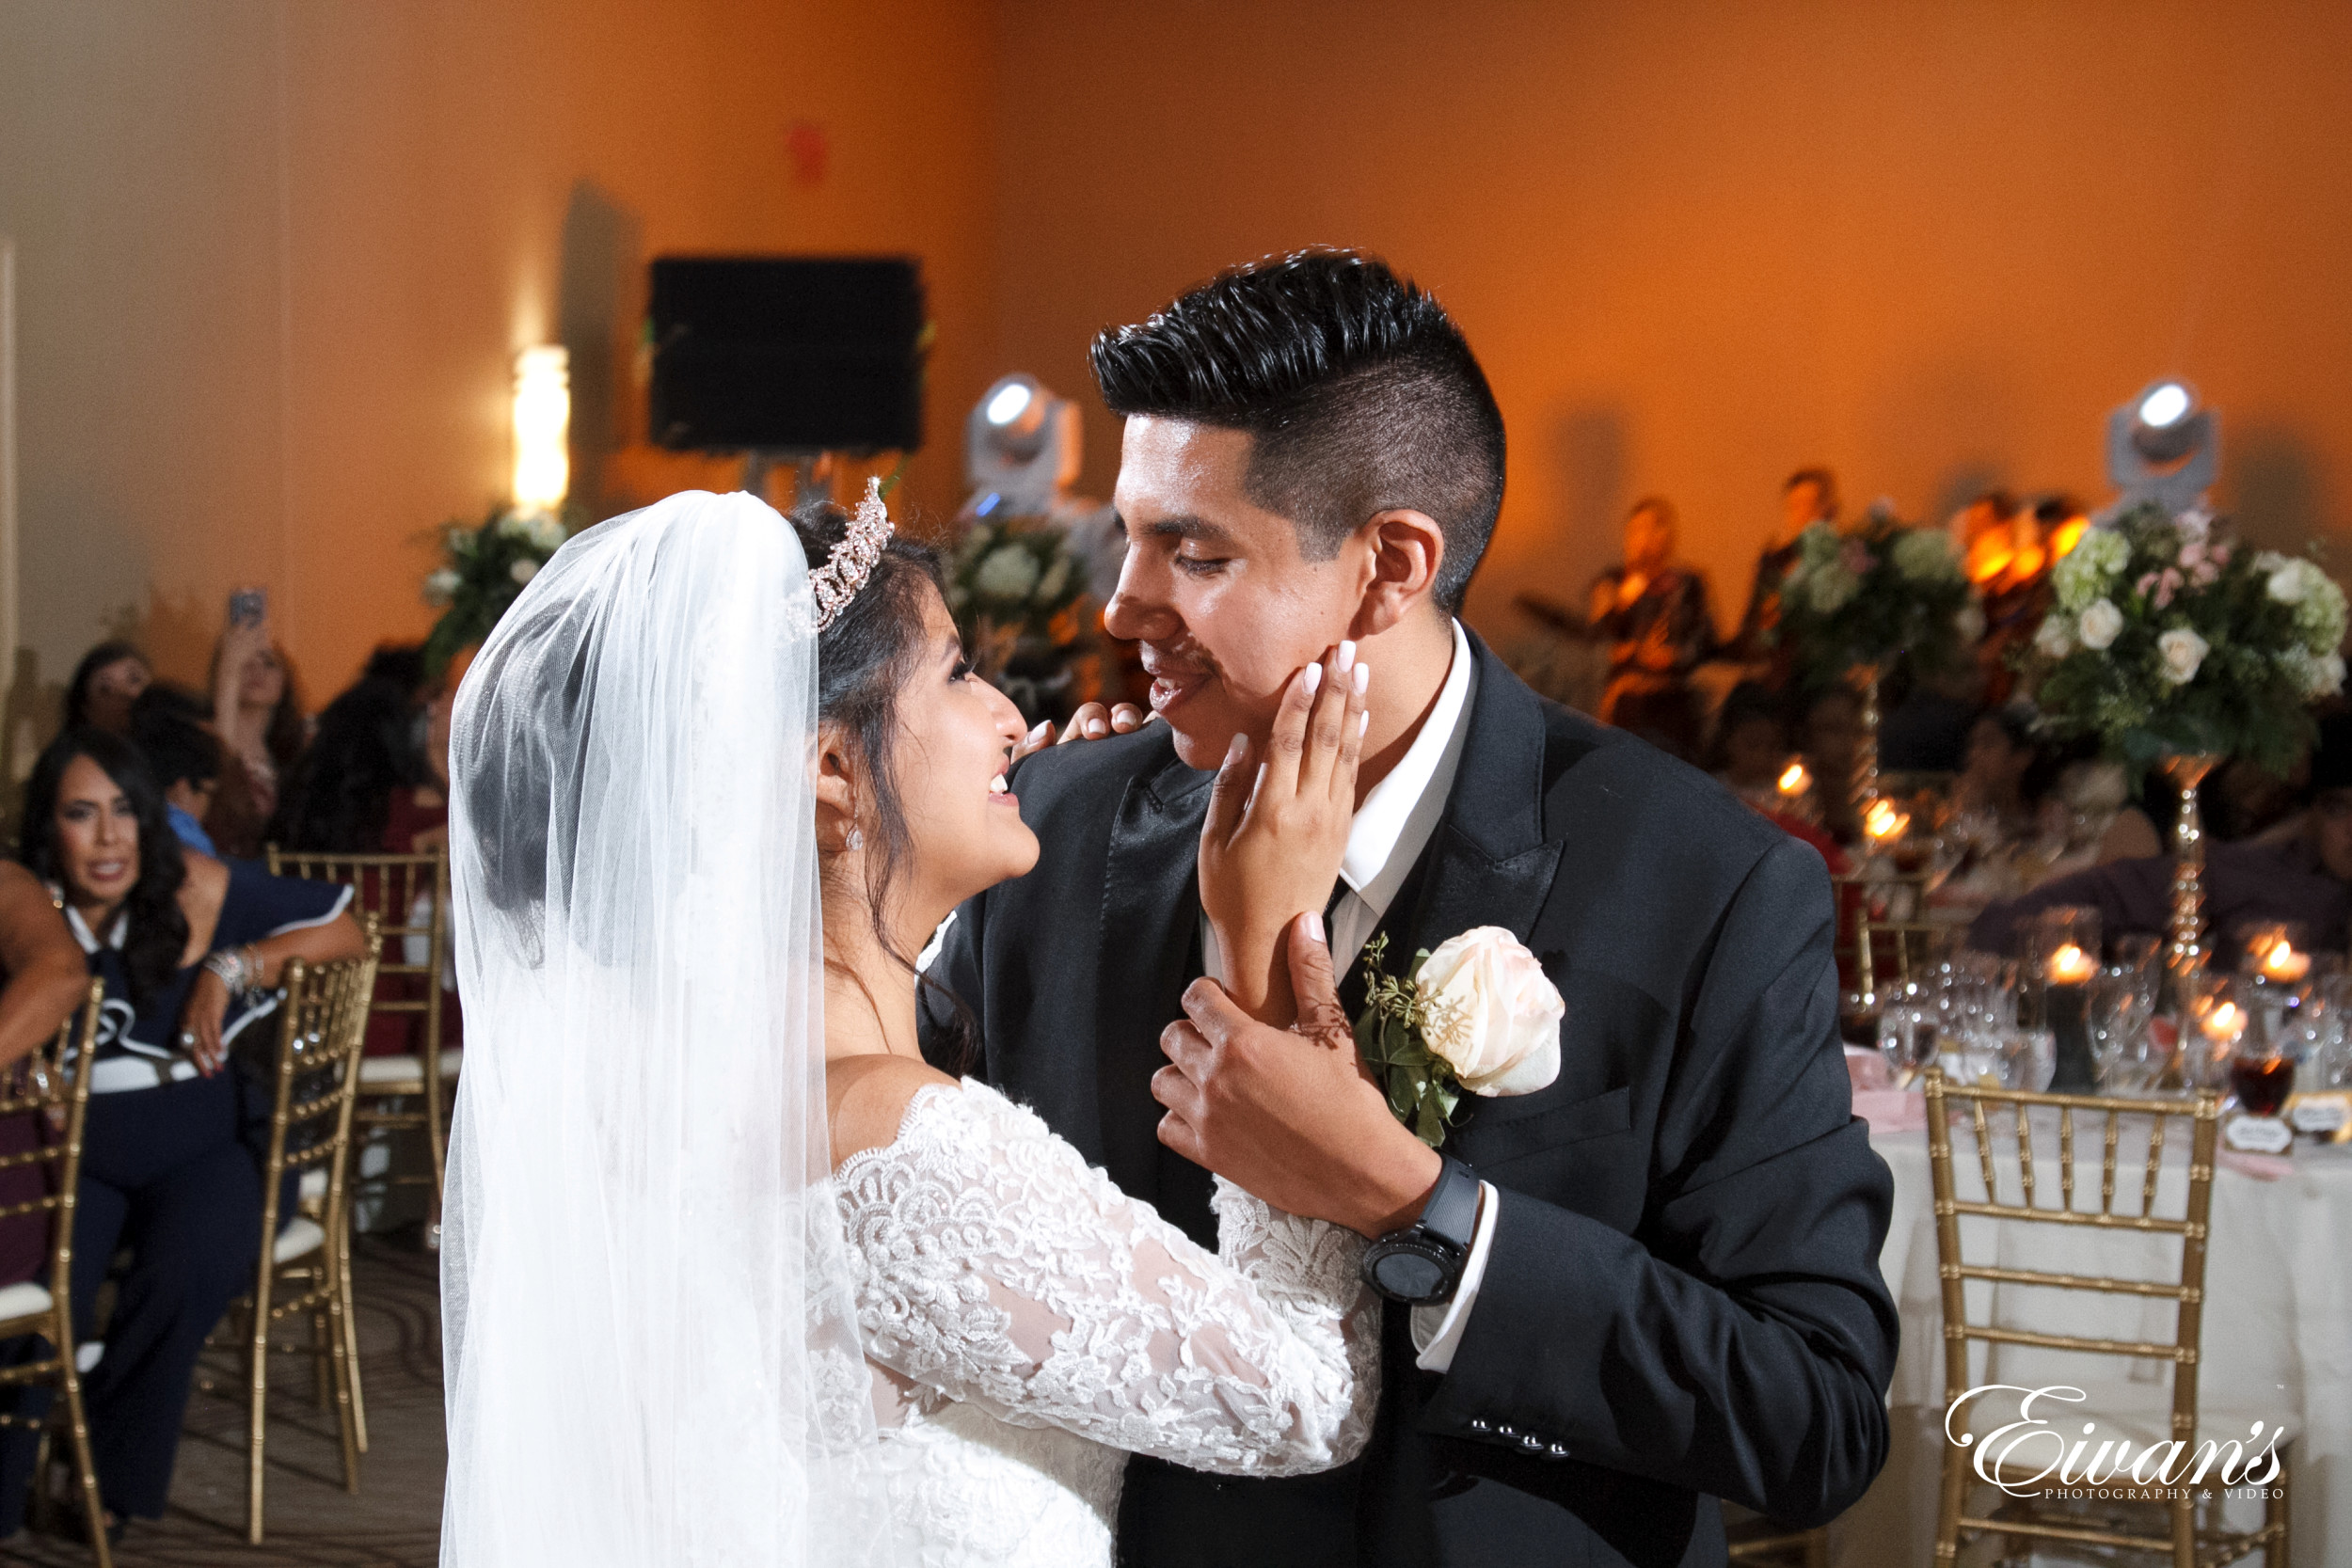 Hispanic And White Marriages